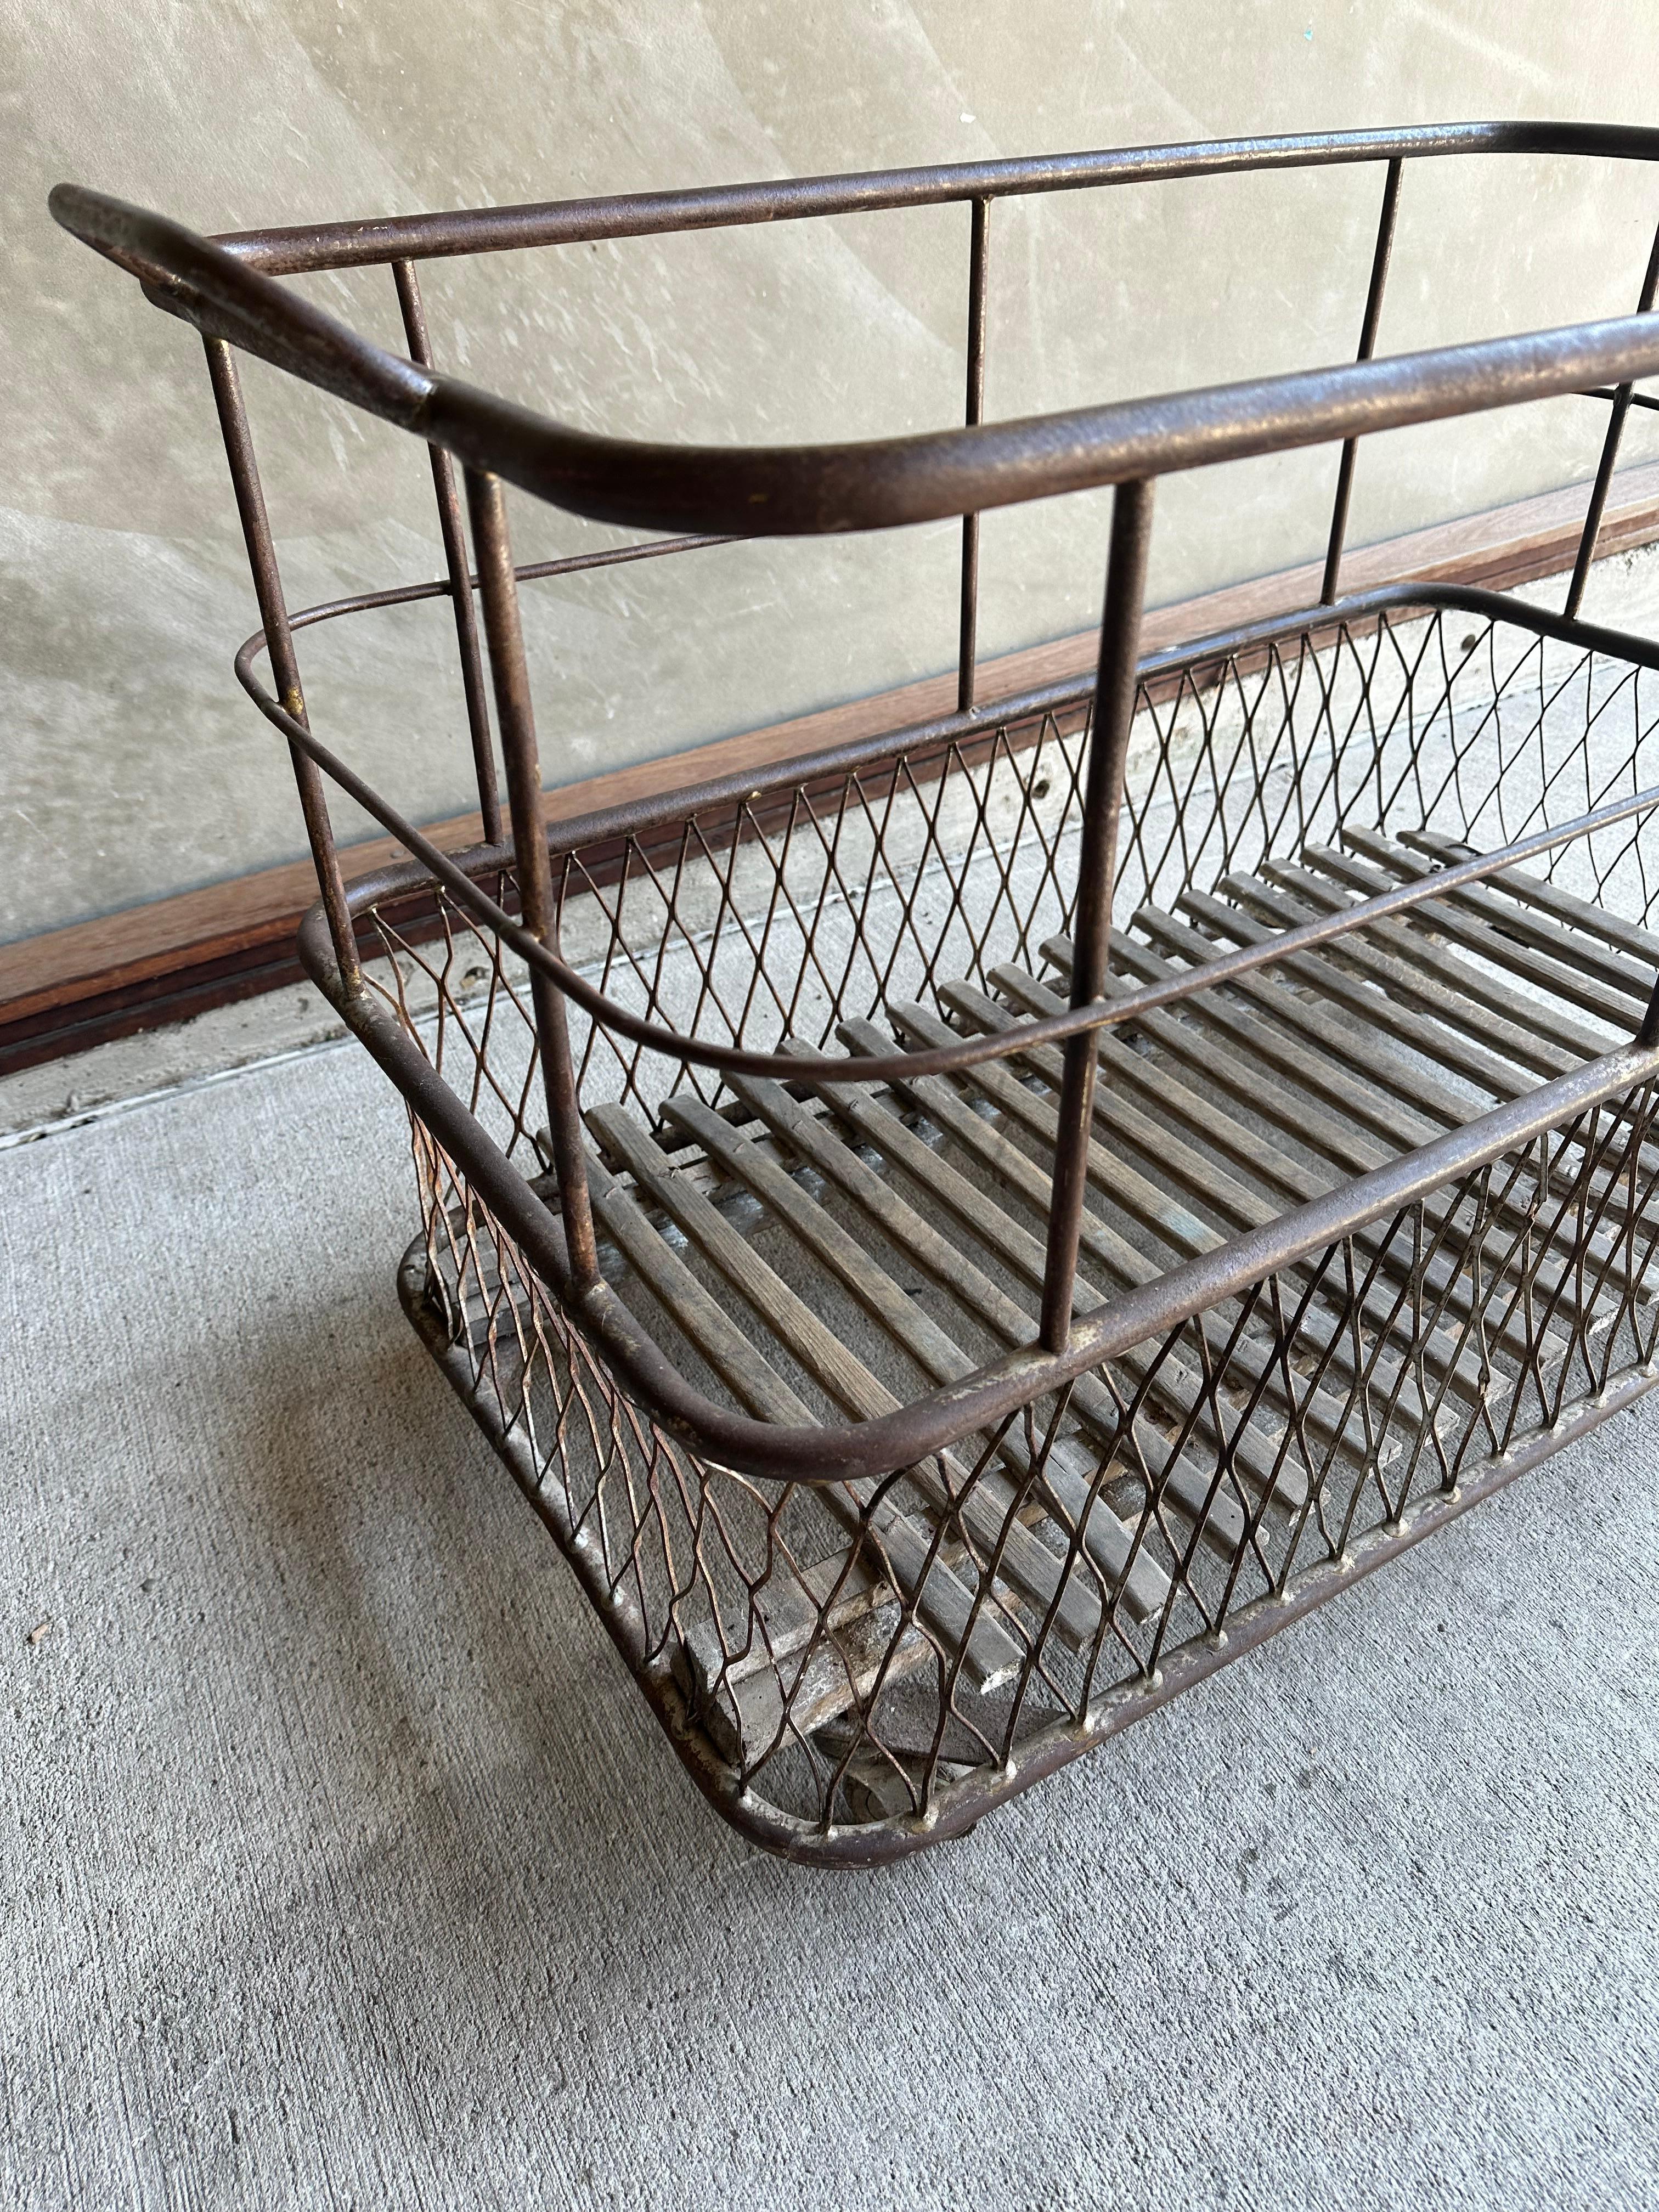 French Welded Steel Cart, Trolley, Basket, France, 19th Century For Sale